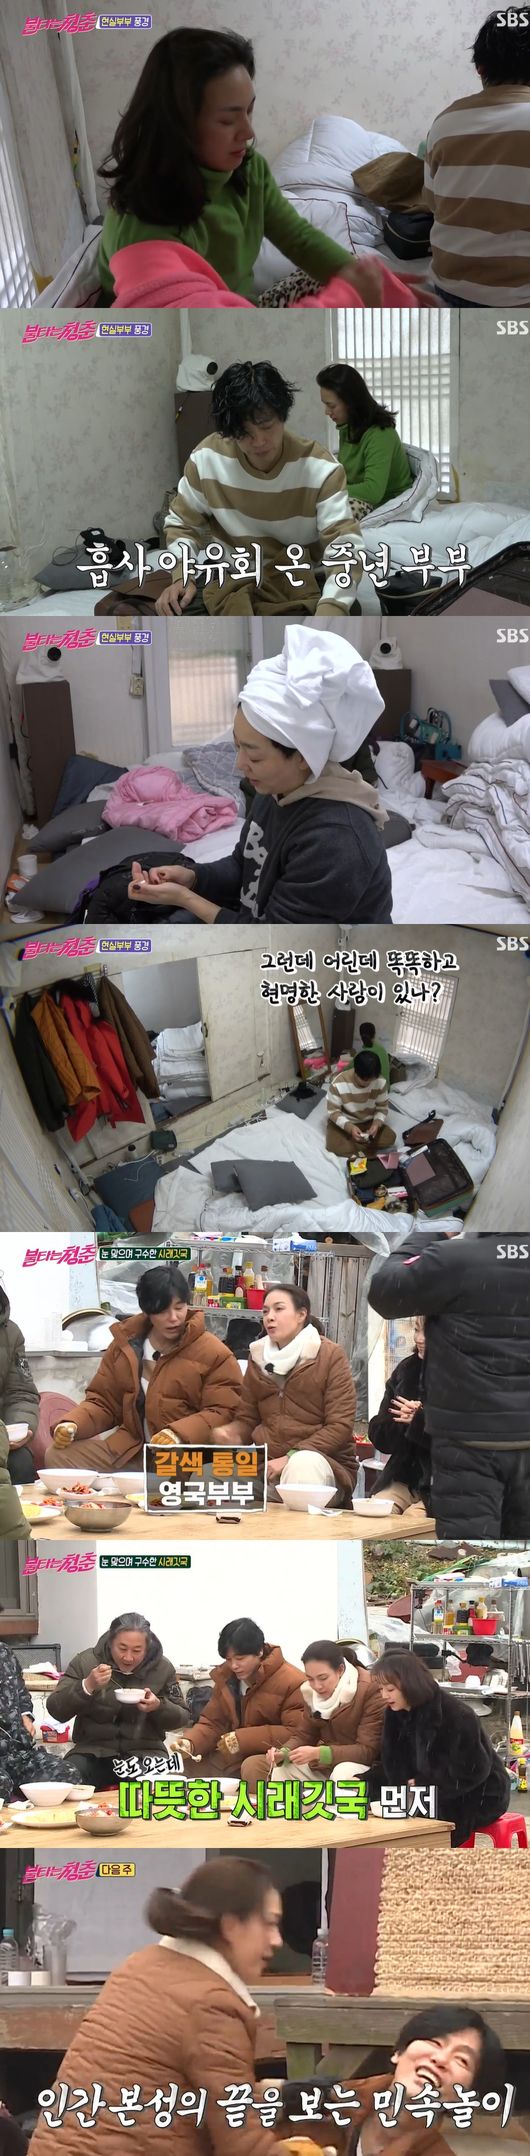 “The moaning sound is strange” Park Sun-young, Choi Seong-guk’s clothes next to him?  Burning 49 禁(?) Lazy Sleeping (ft. Choi Chang-min) (‘Unbelievable’)[어저께TV]